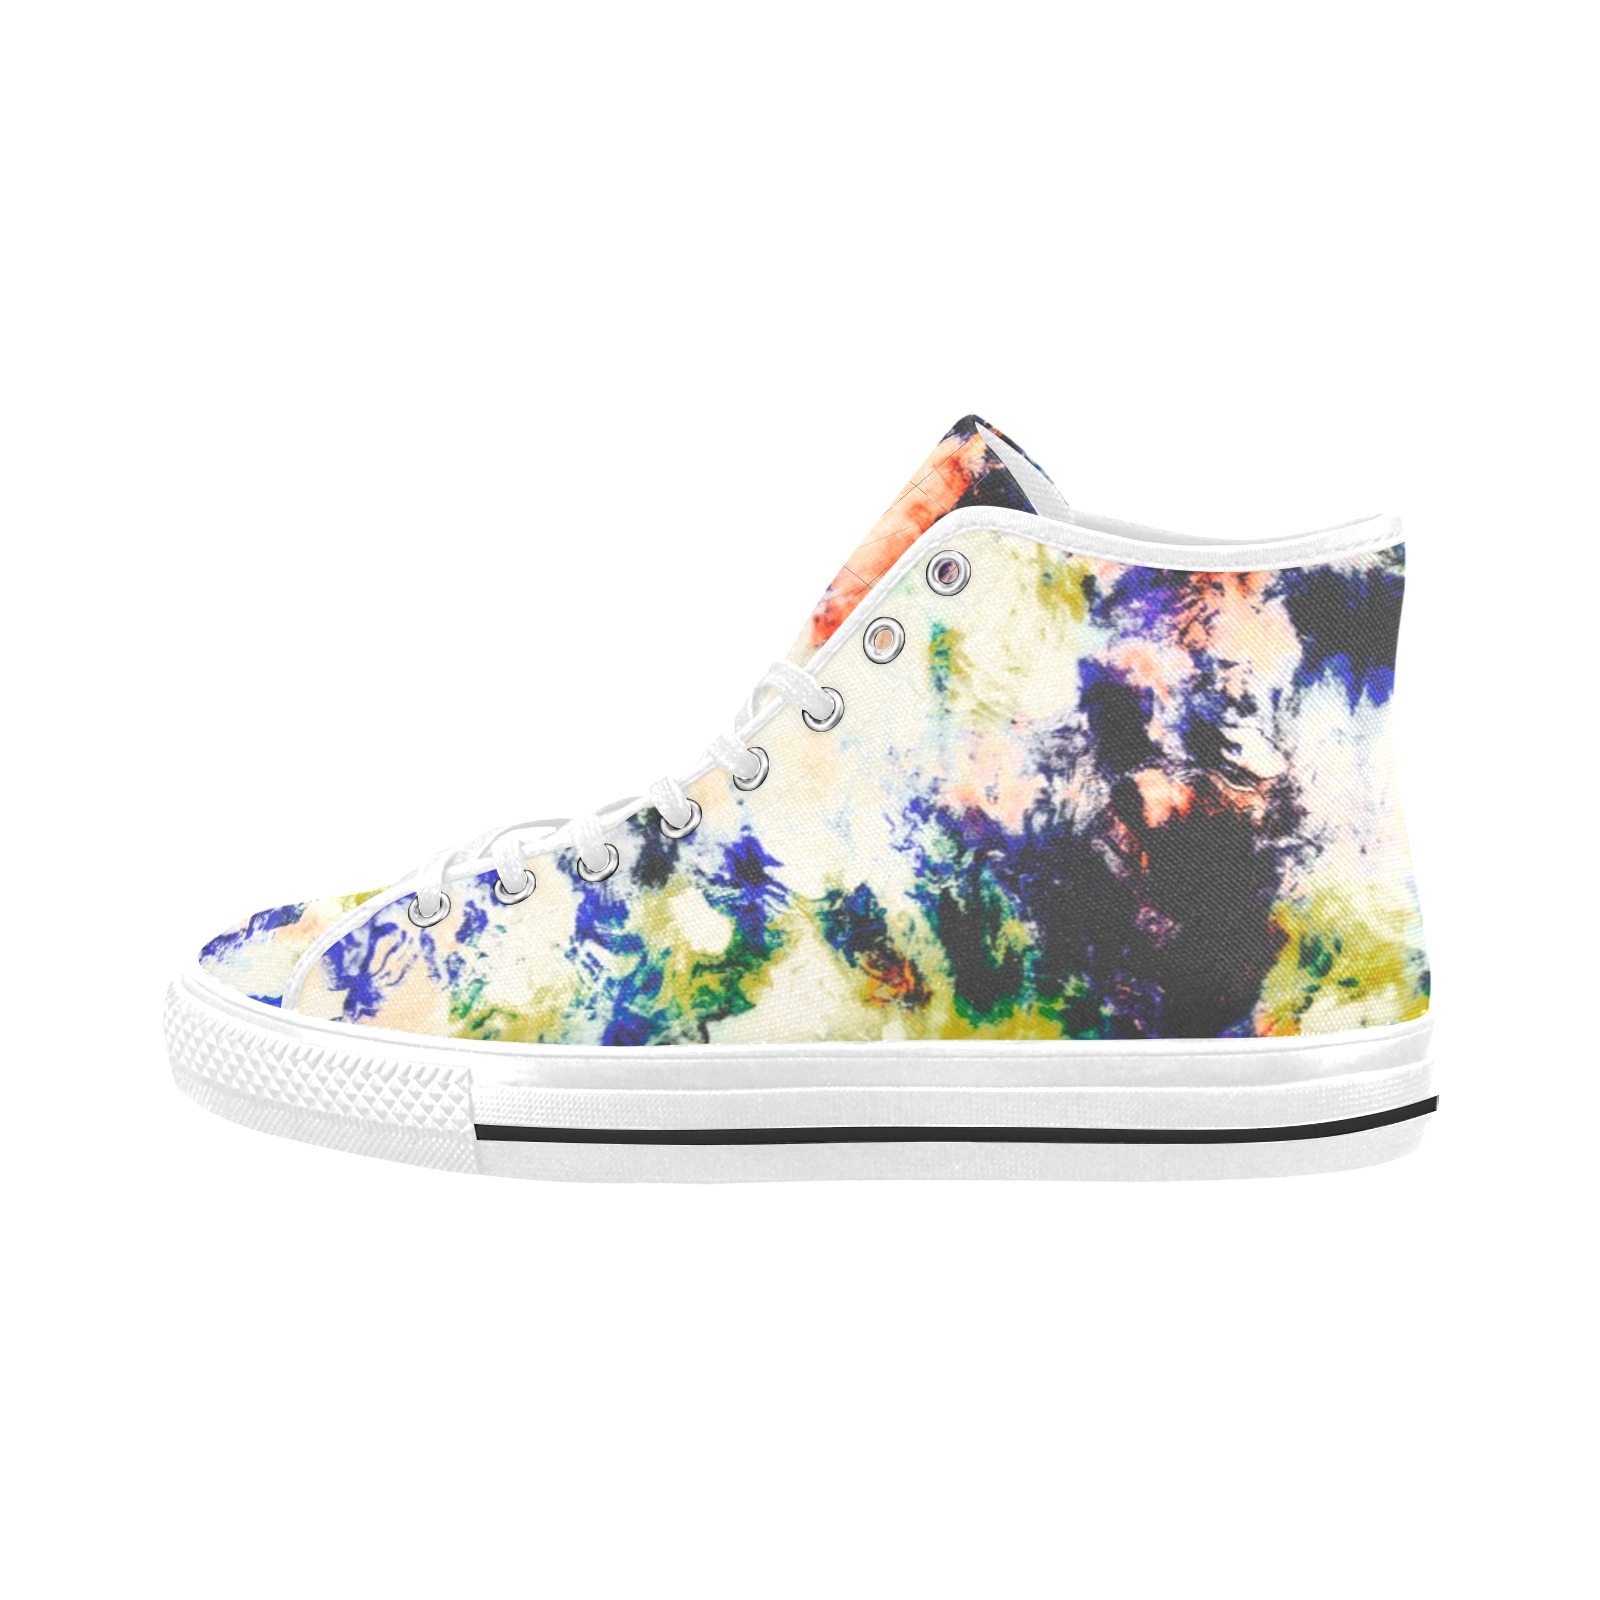 Modern watercolor colorful marbling Vancouver H Women's Canvas Shoes (1013-1)